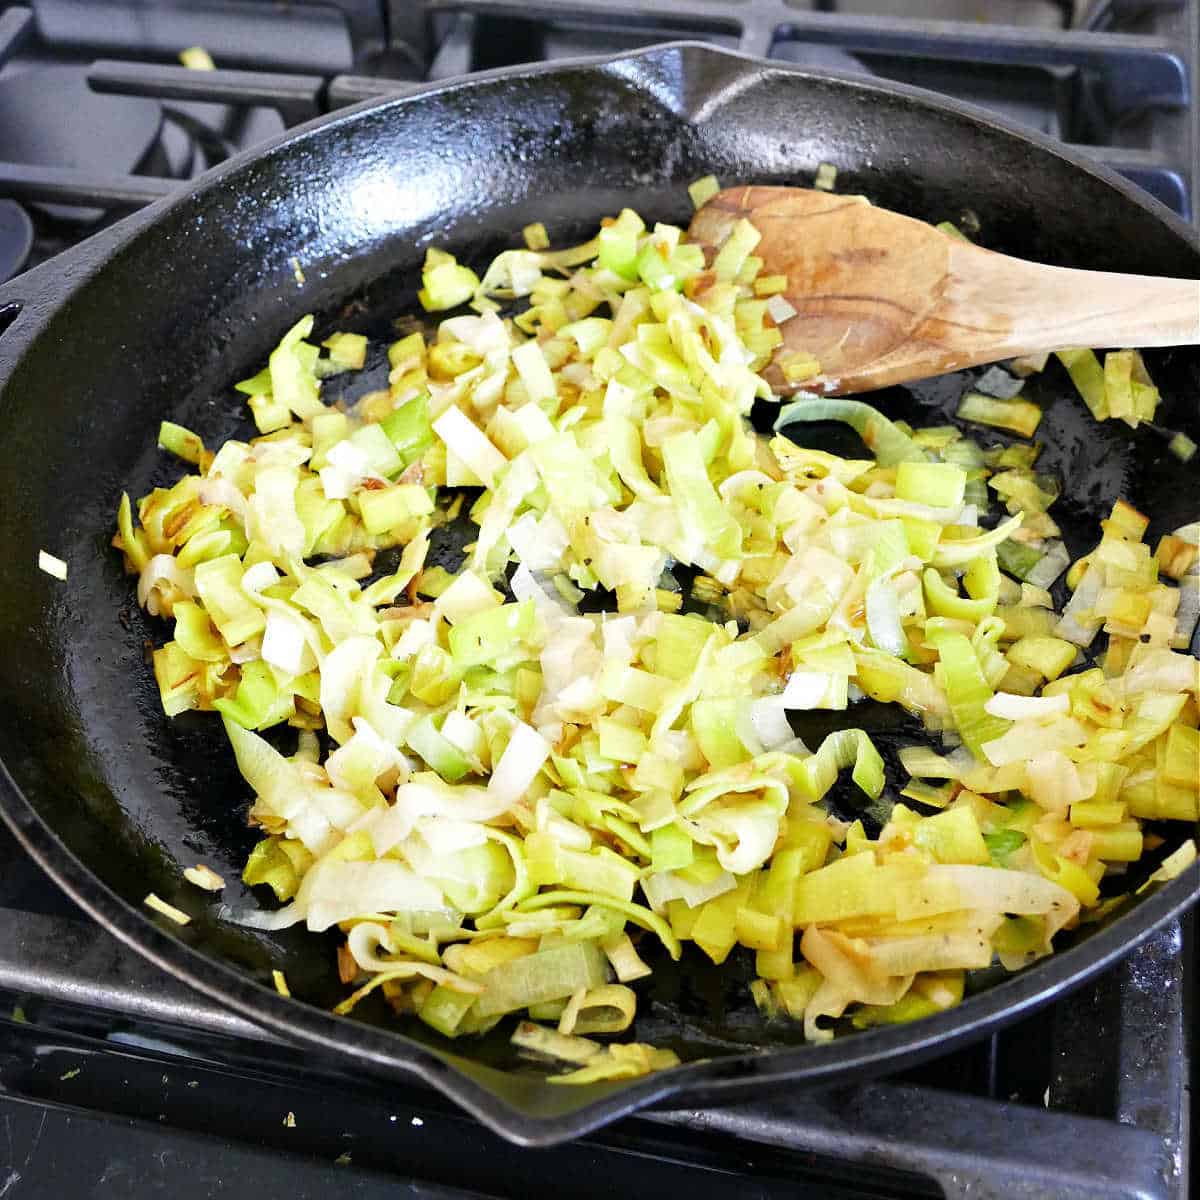 Sauteeing the leeks in a large skillet.